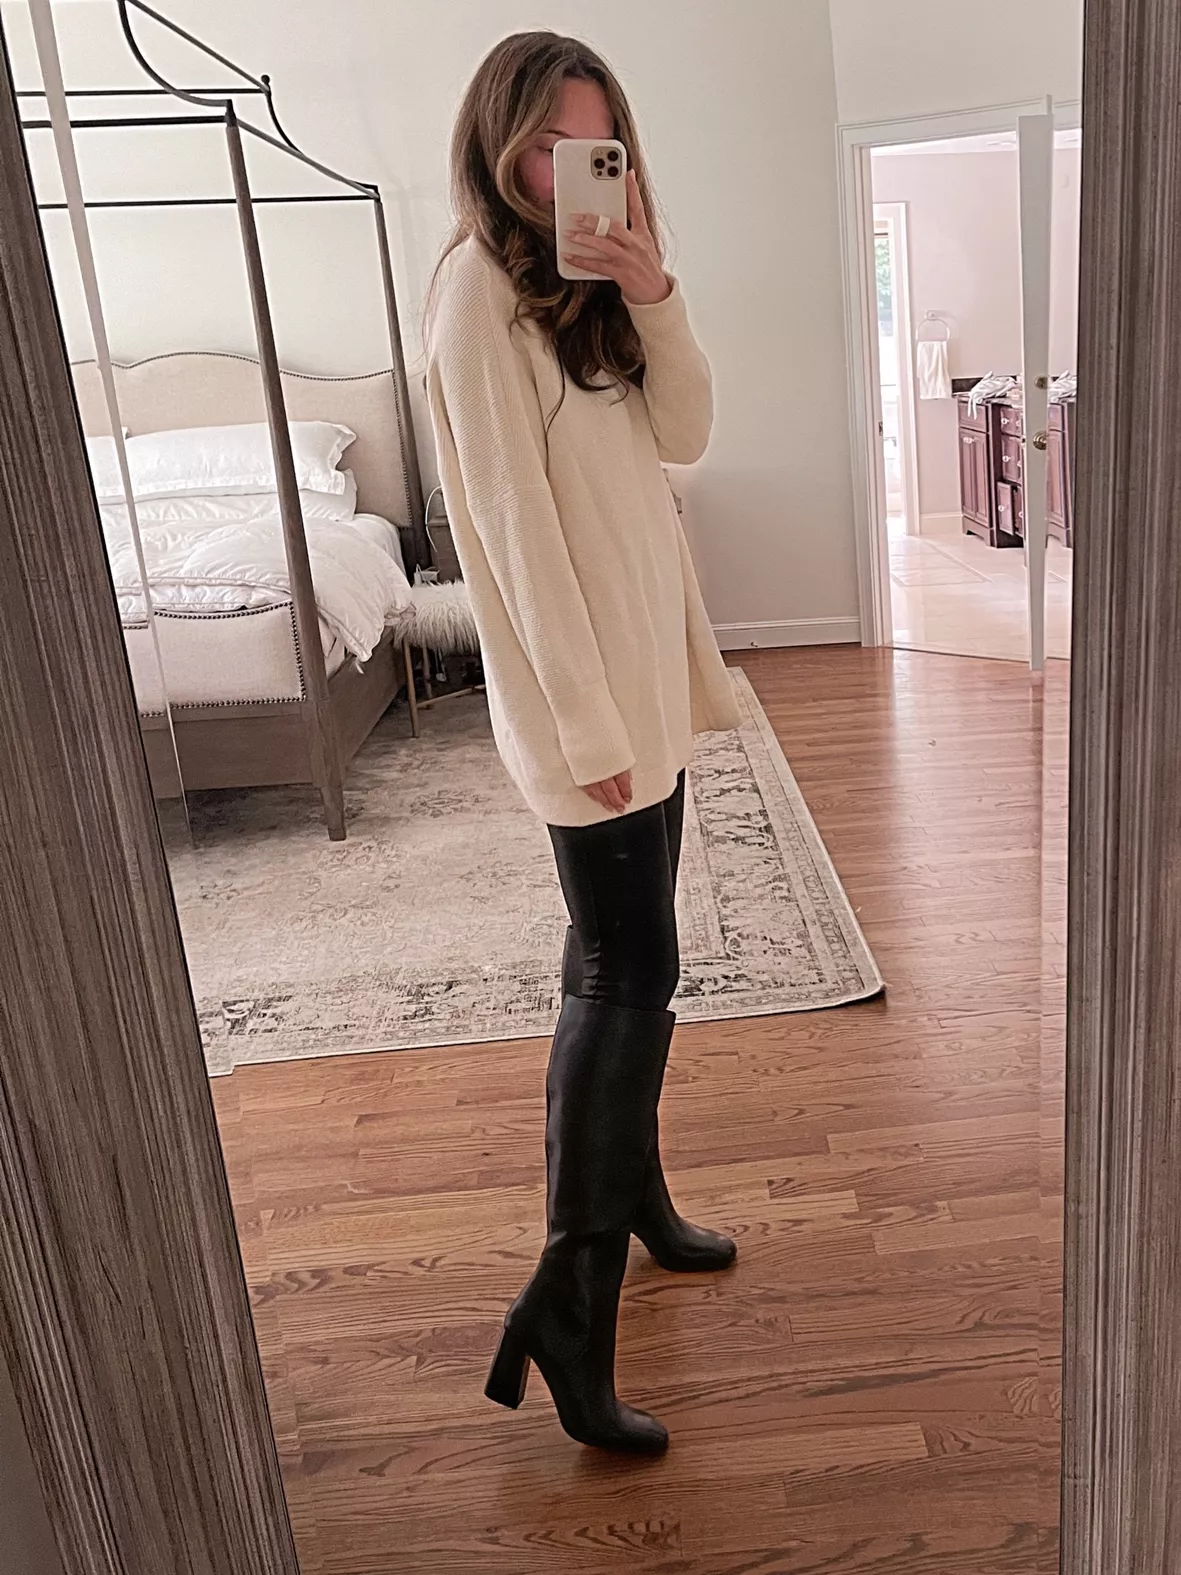 Dark Brown Leggings with Brown Knee High Boots Outfits (2 ideas